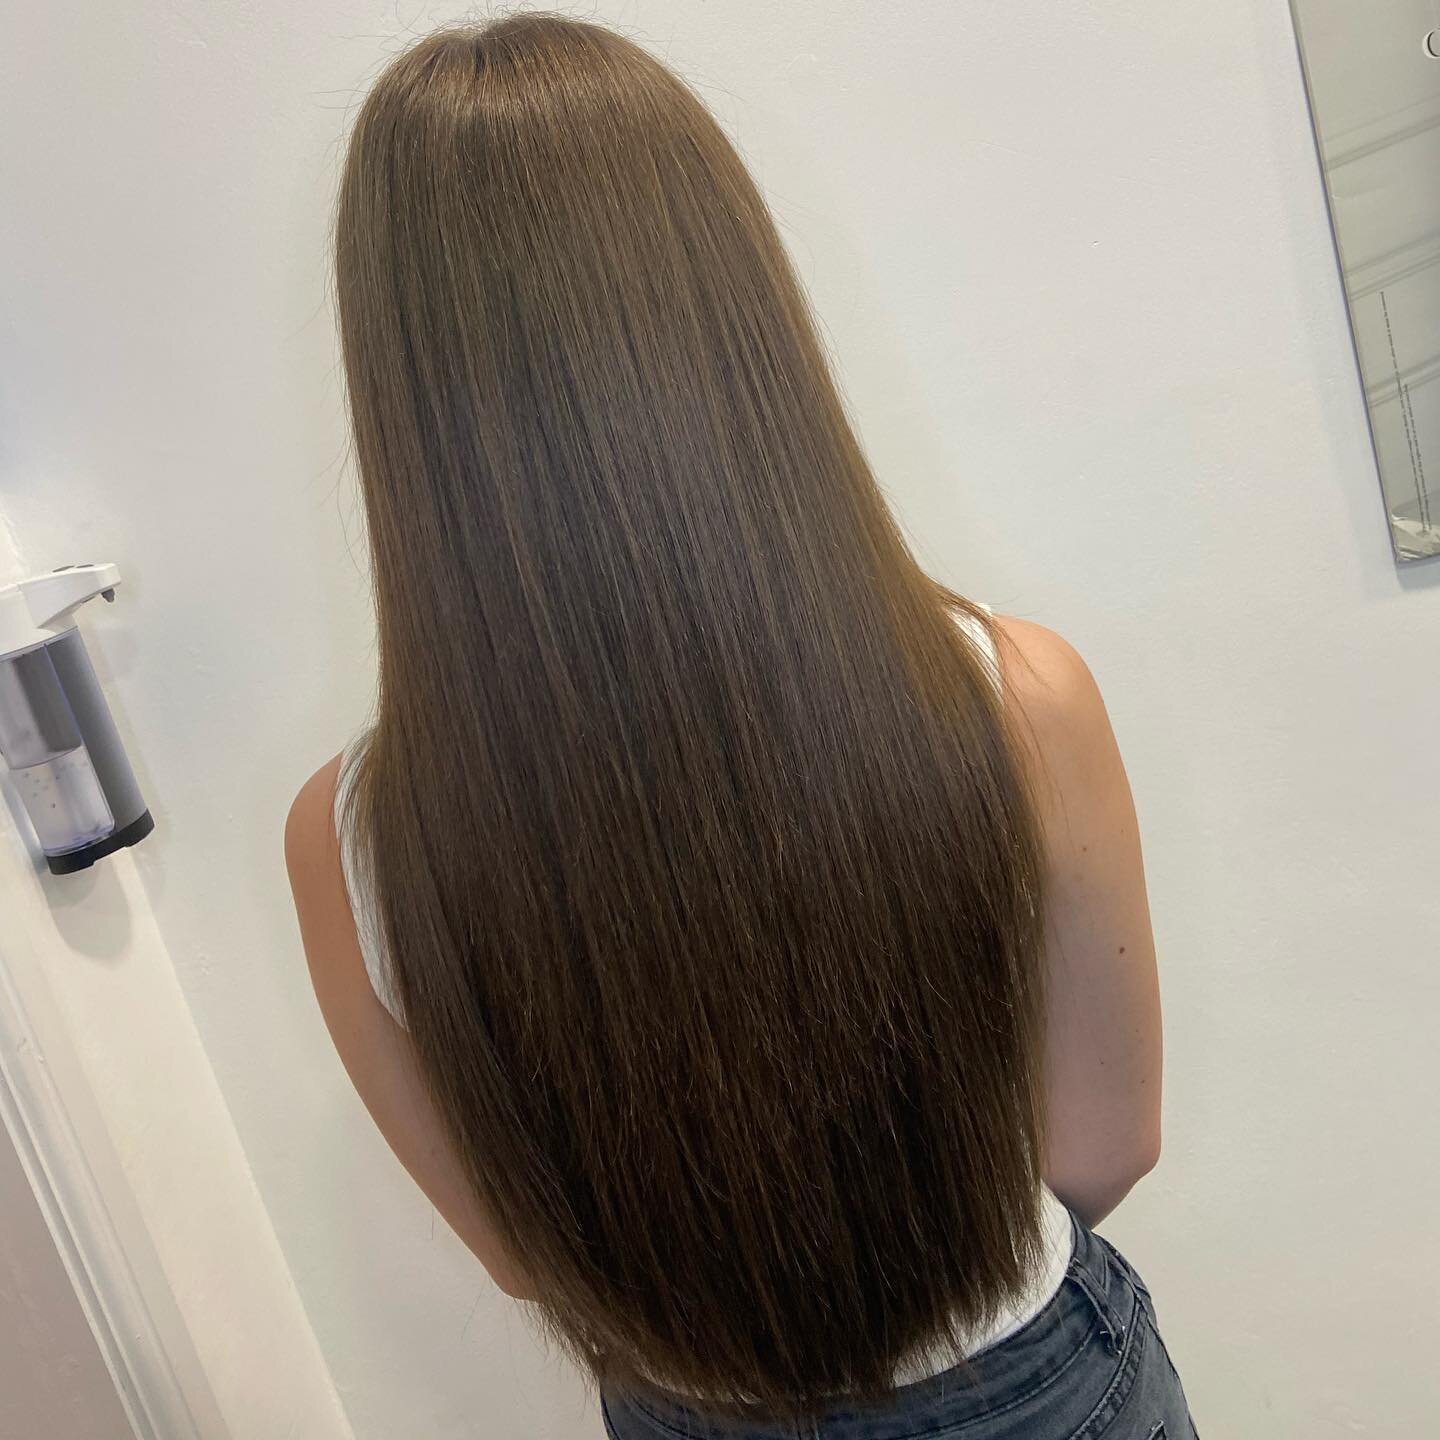 When that Blend is Seamless

If it looks natural straight it will look natural wavy!

Most of my pictures are always of wavy finishes but I never hide my cut and every client is shown the finished look smooth before I wave it up!

How insane is this 